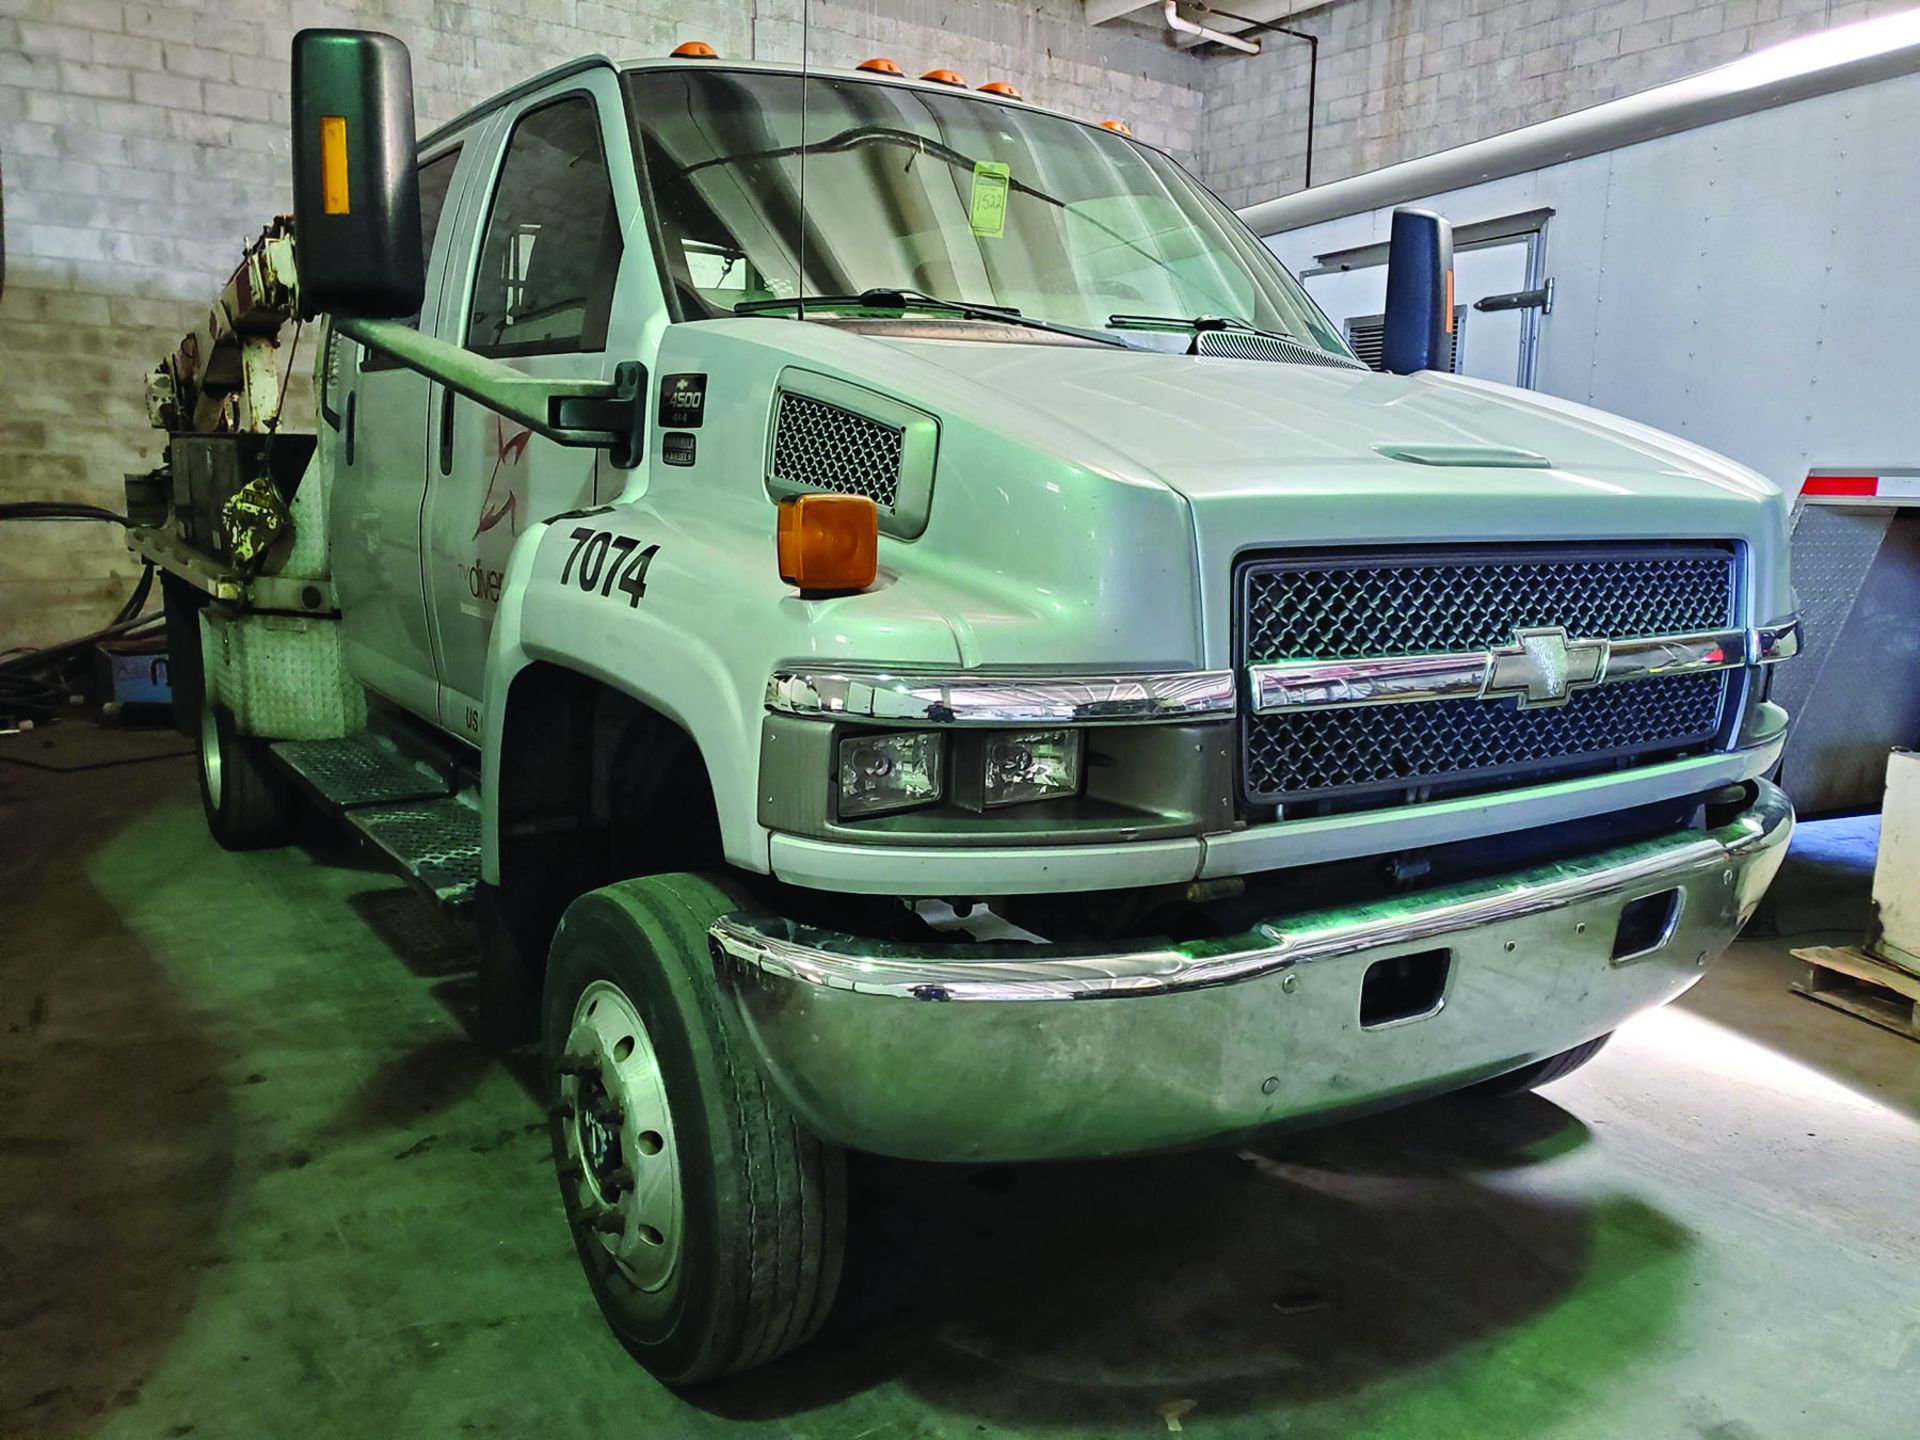 2006 CHEVROLET C4500 4X4 CREW CAB FLAT/STAKE BED TRUCK W/IMT 2015 TELESCOPING BOOM, 2.5 TON HOOK, - Image 16 of 19